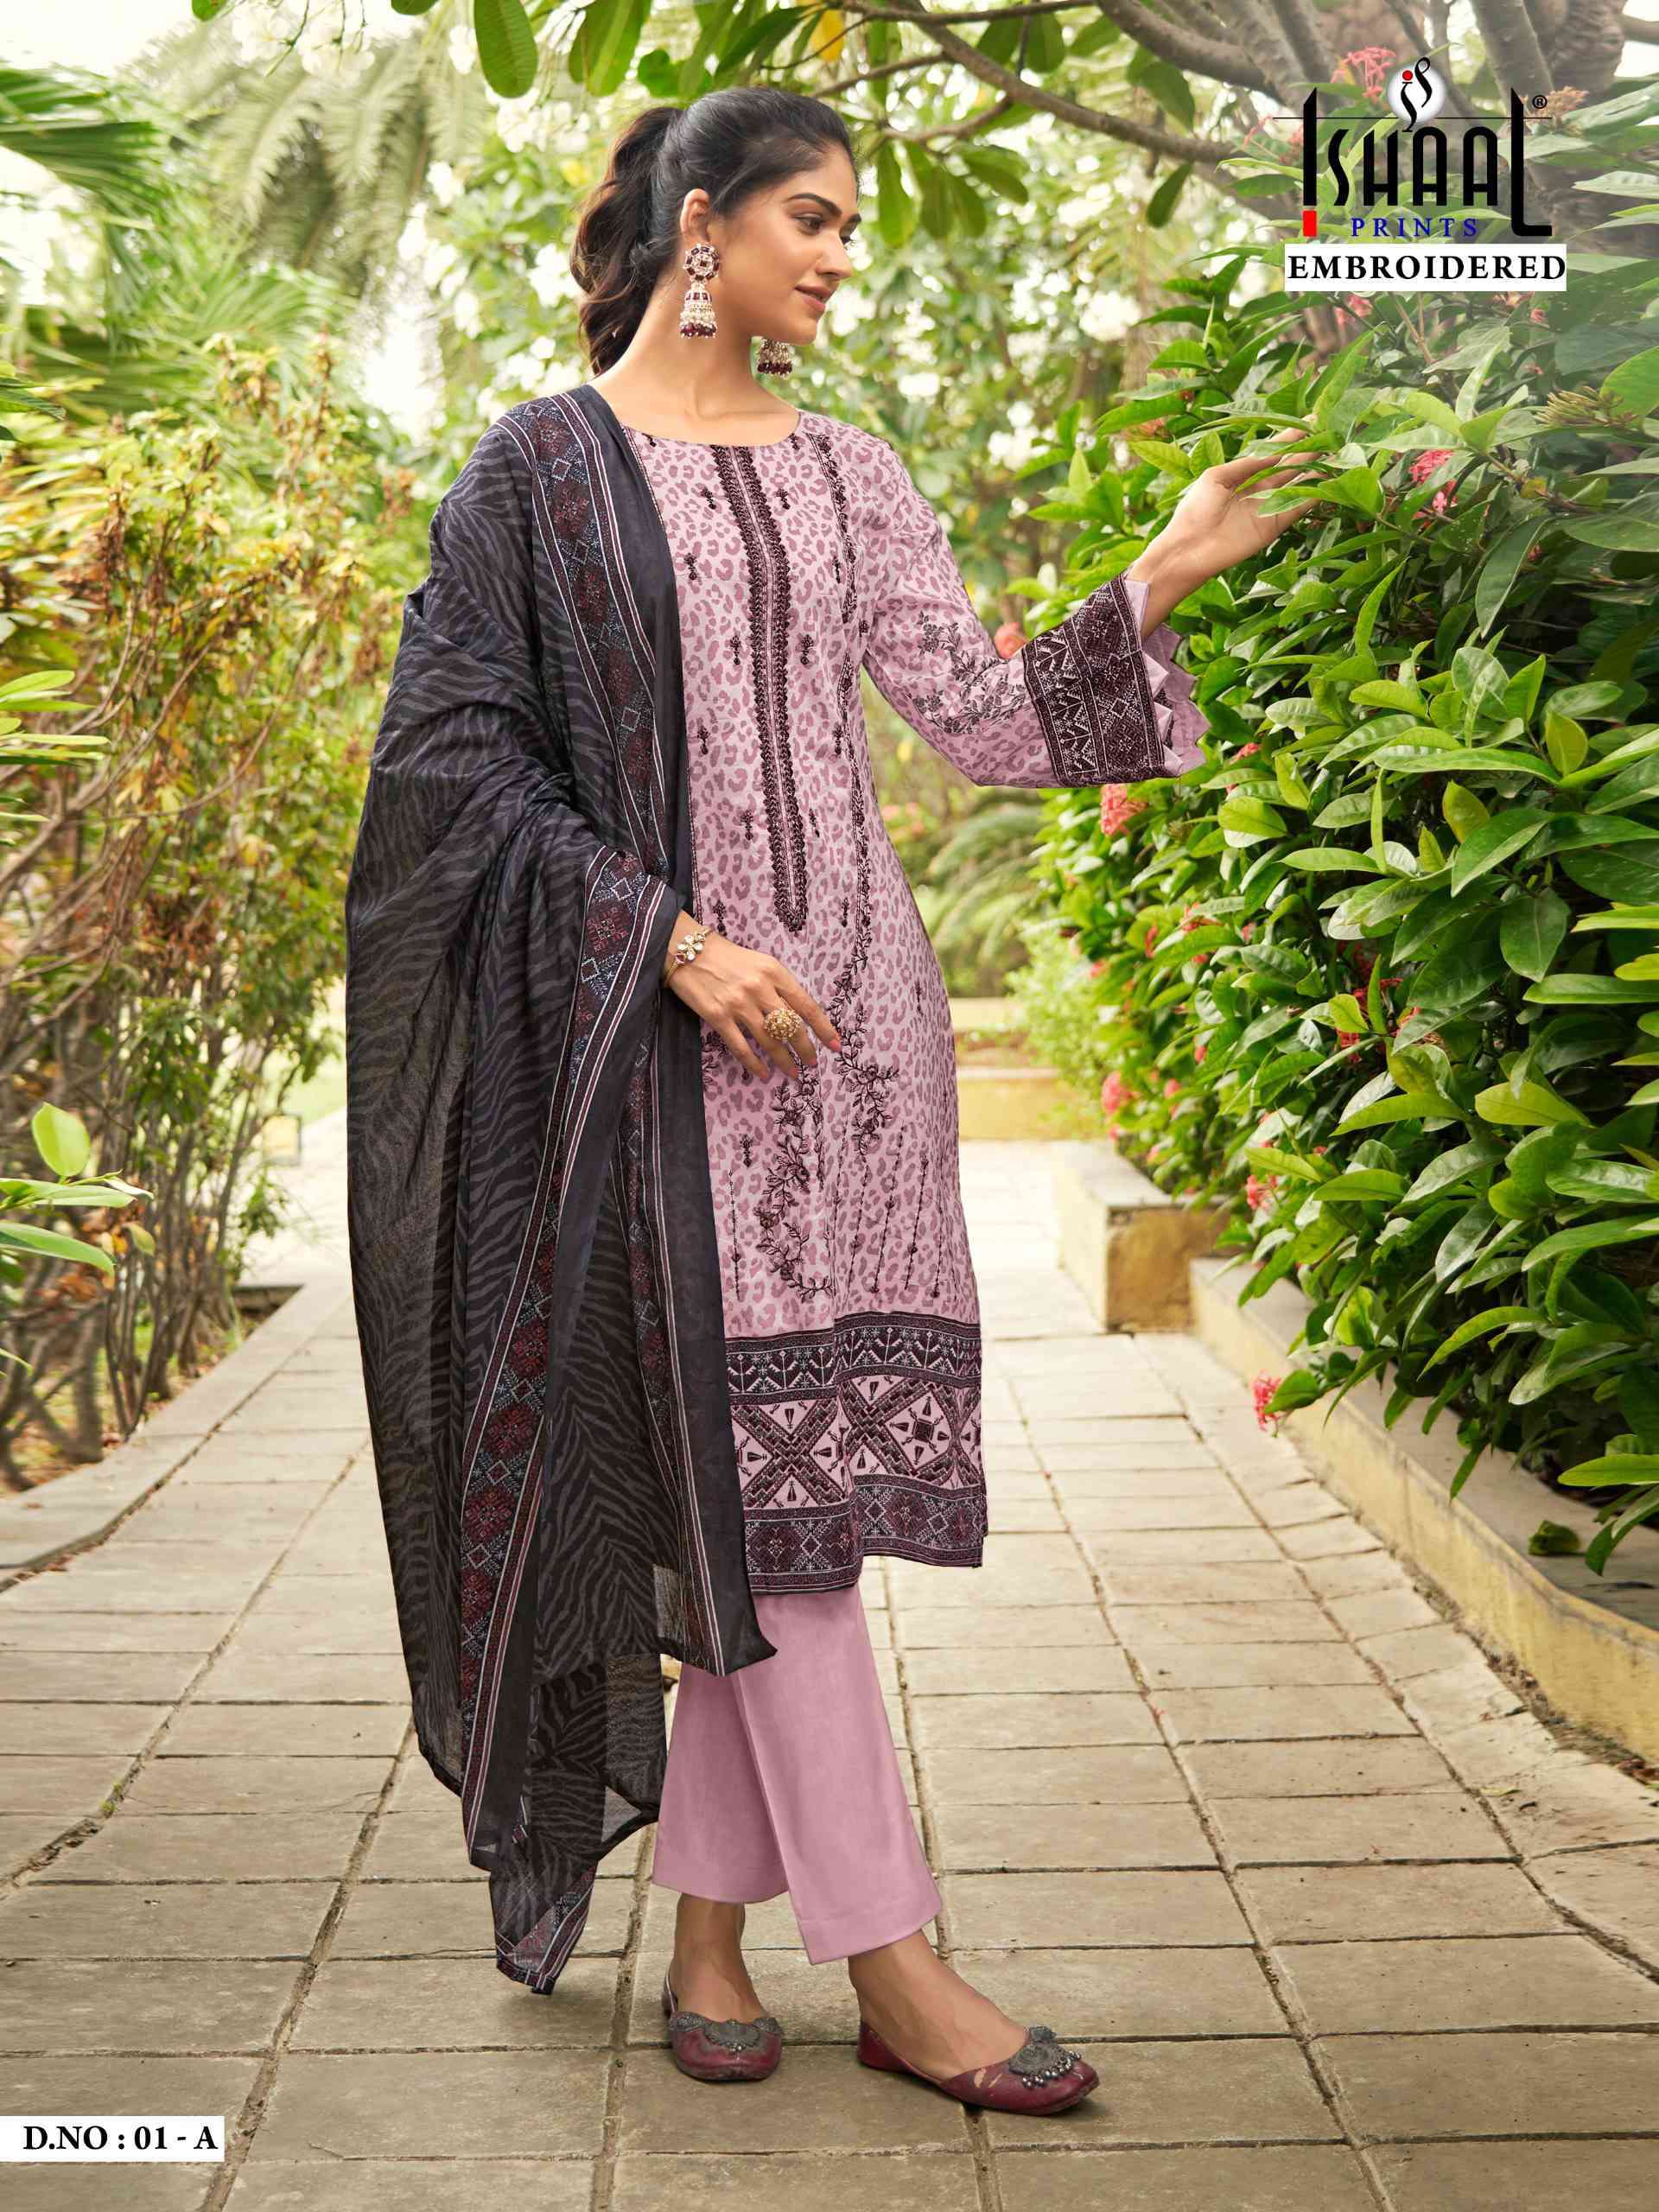 Ishaal Embroidered D 1 Colors Summer Collection Salwar Suit Catalog Dealers